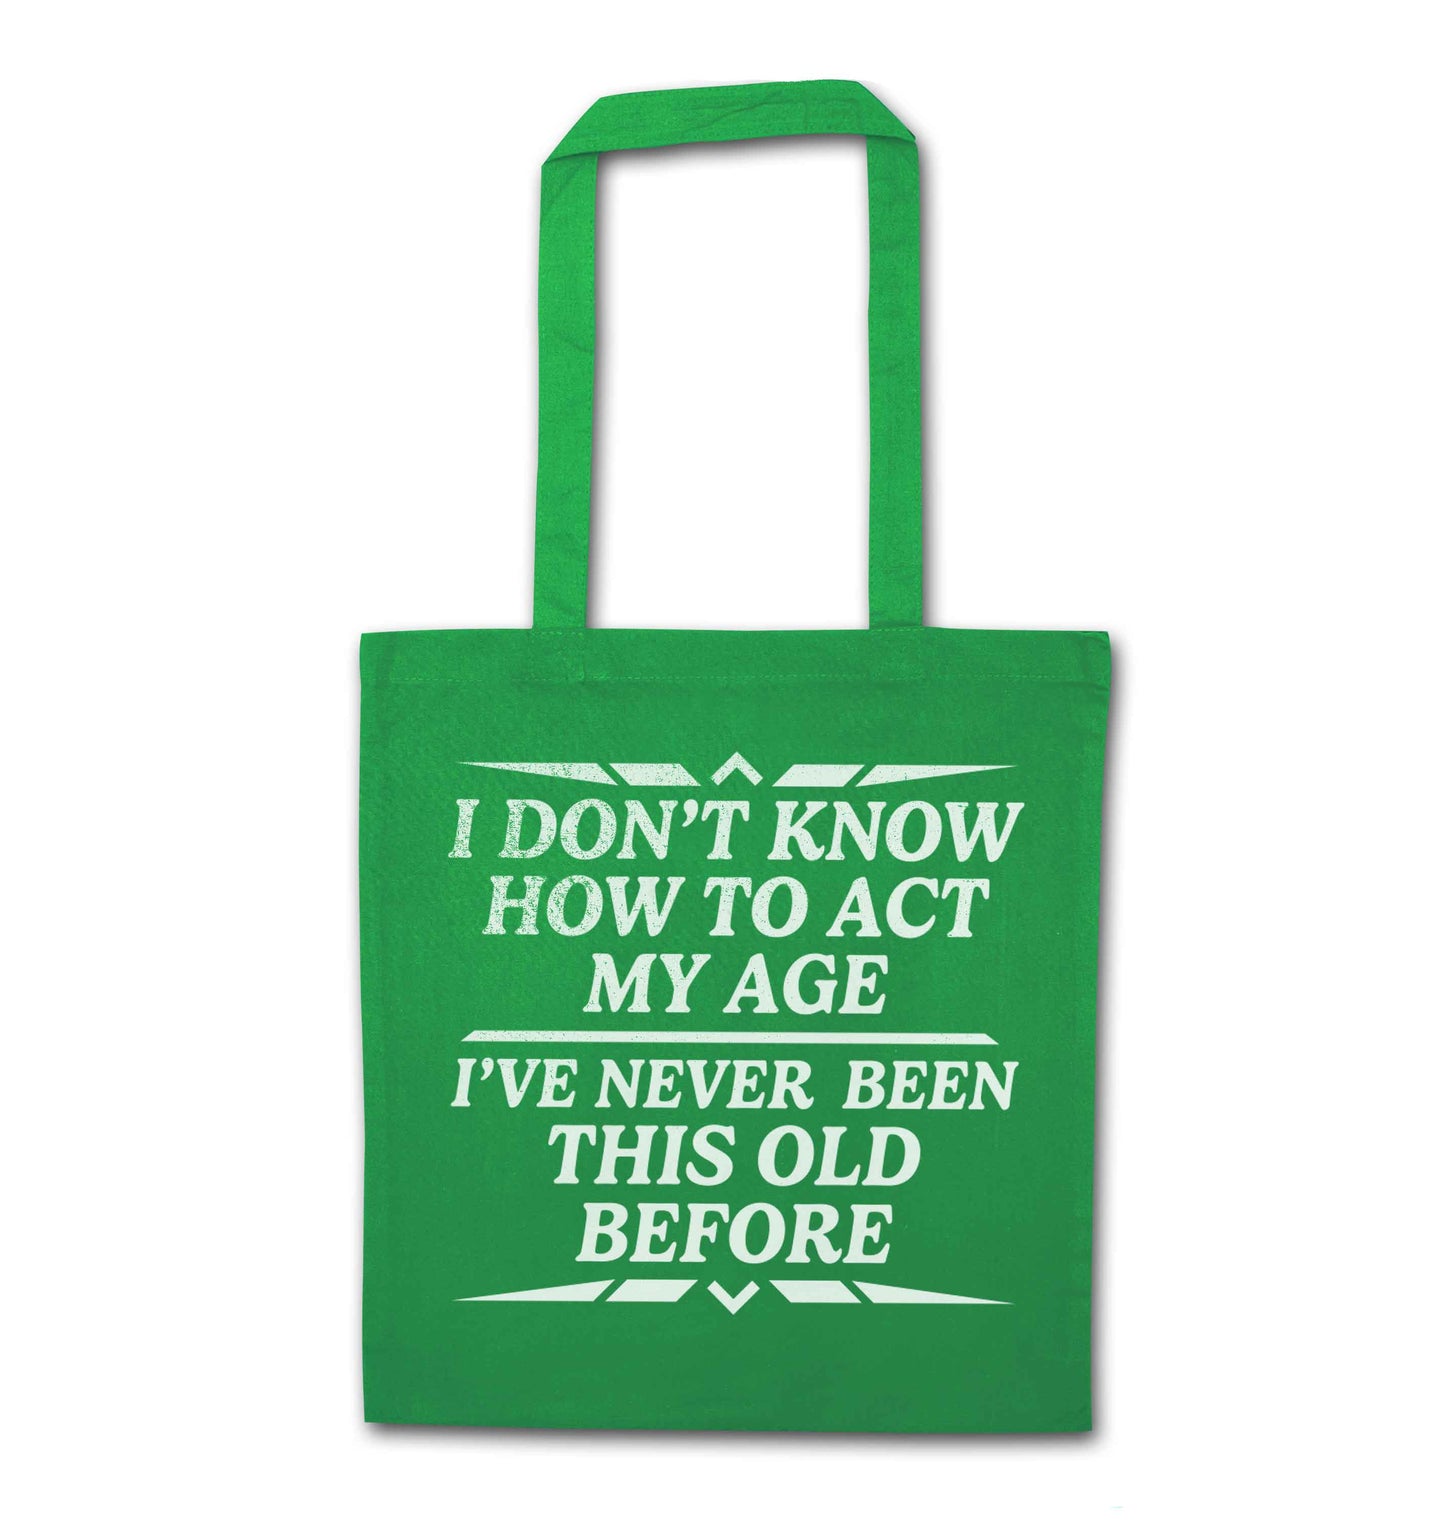 I don't know how to act my age I've never been this old before green tote bag